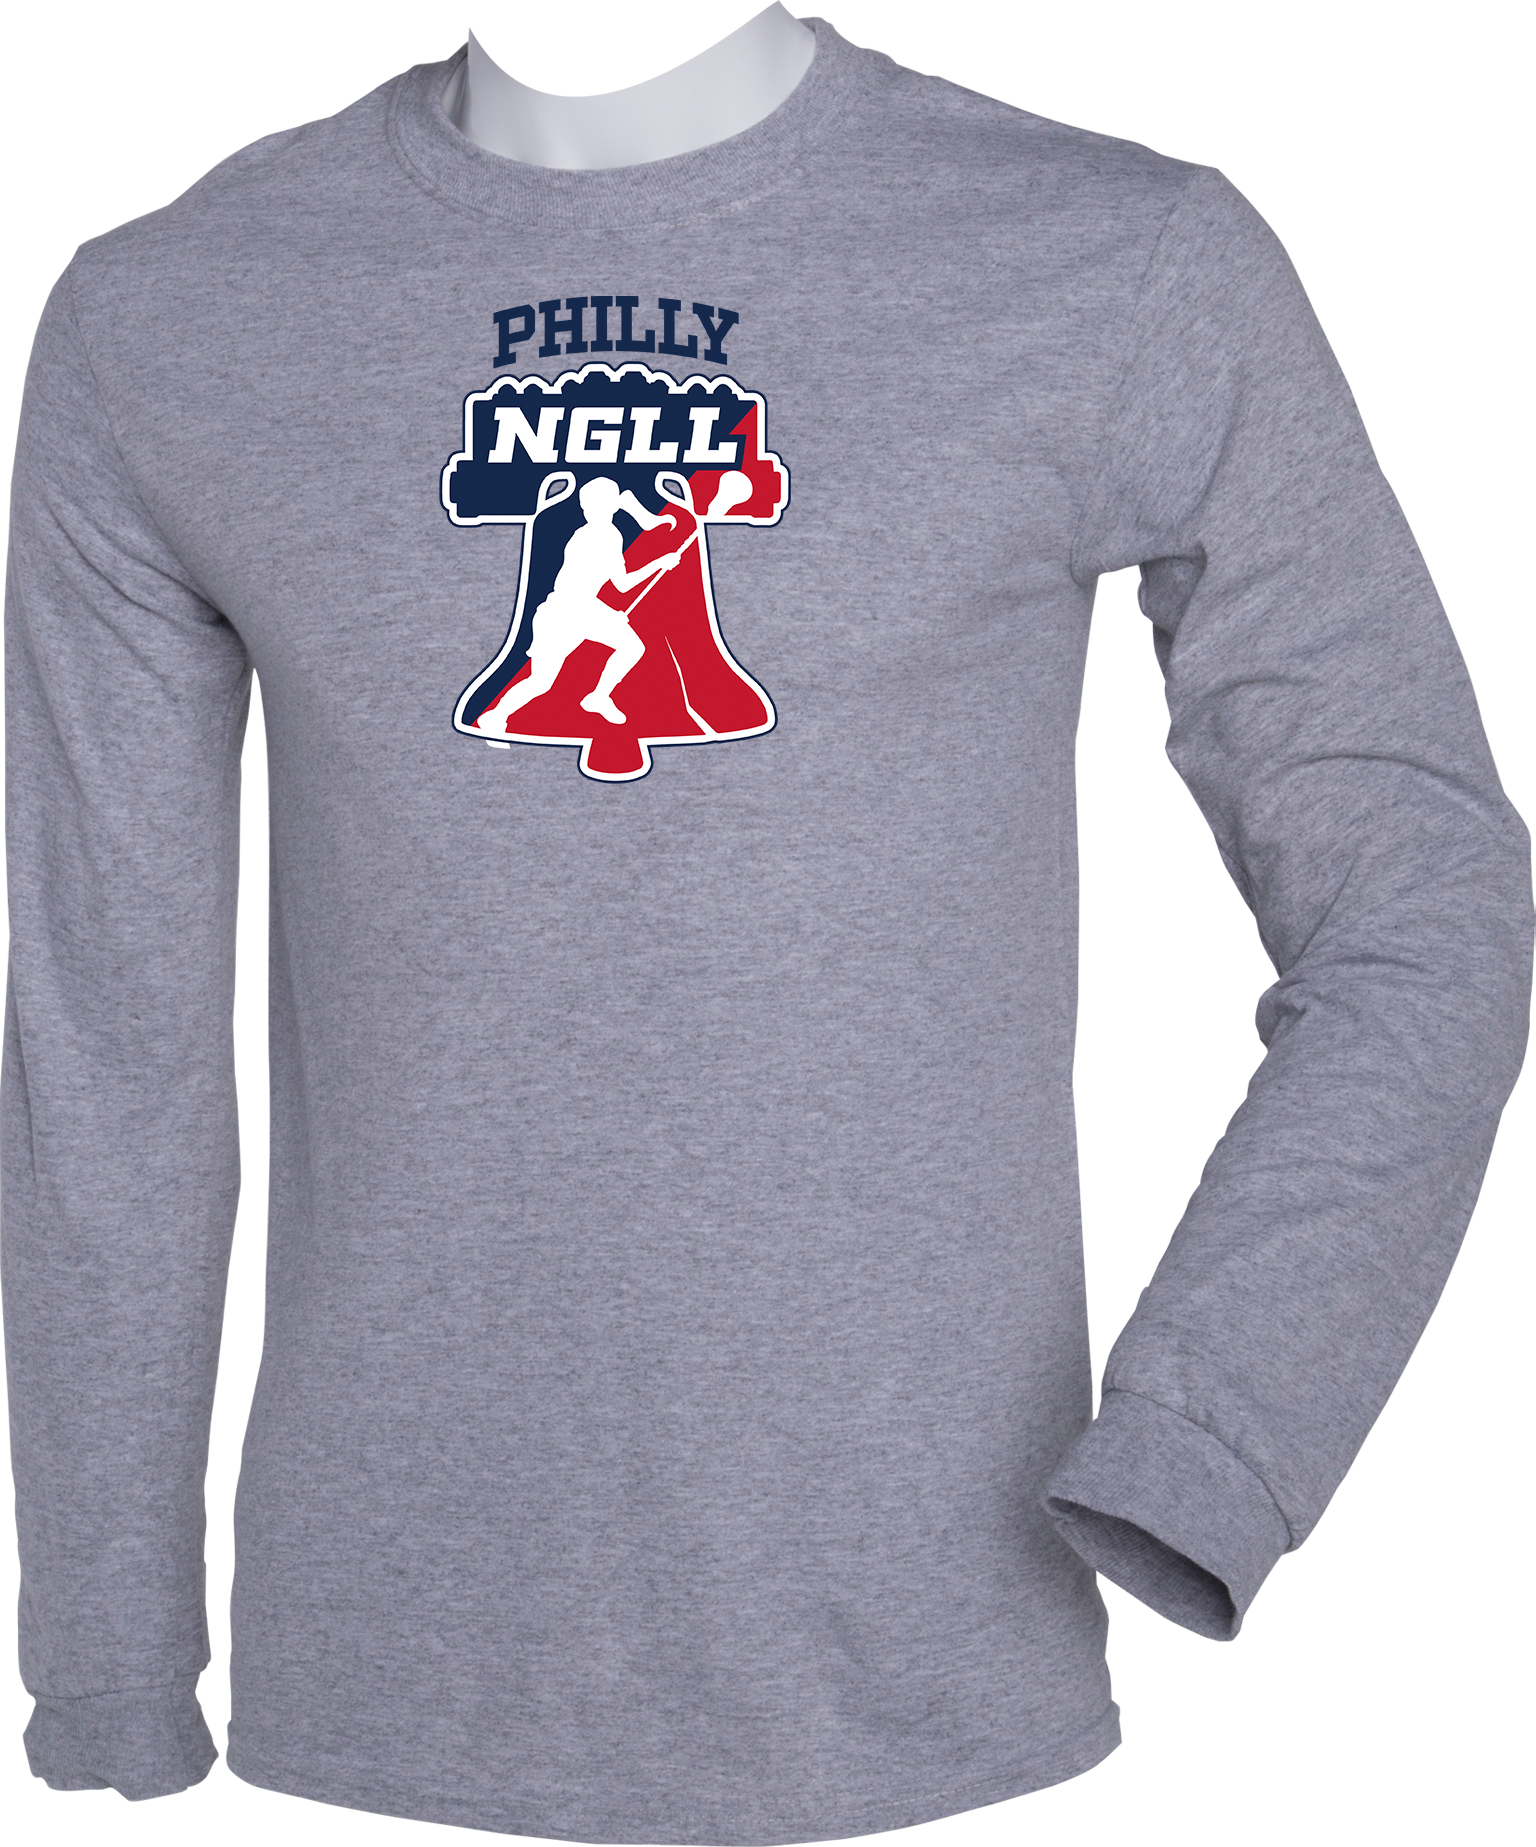 LONG SLEEVES - 2023 NGLL Philly